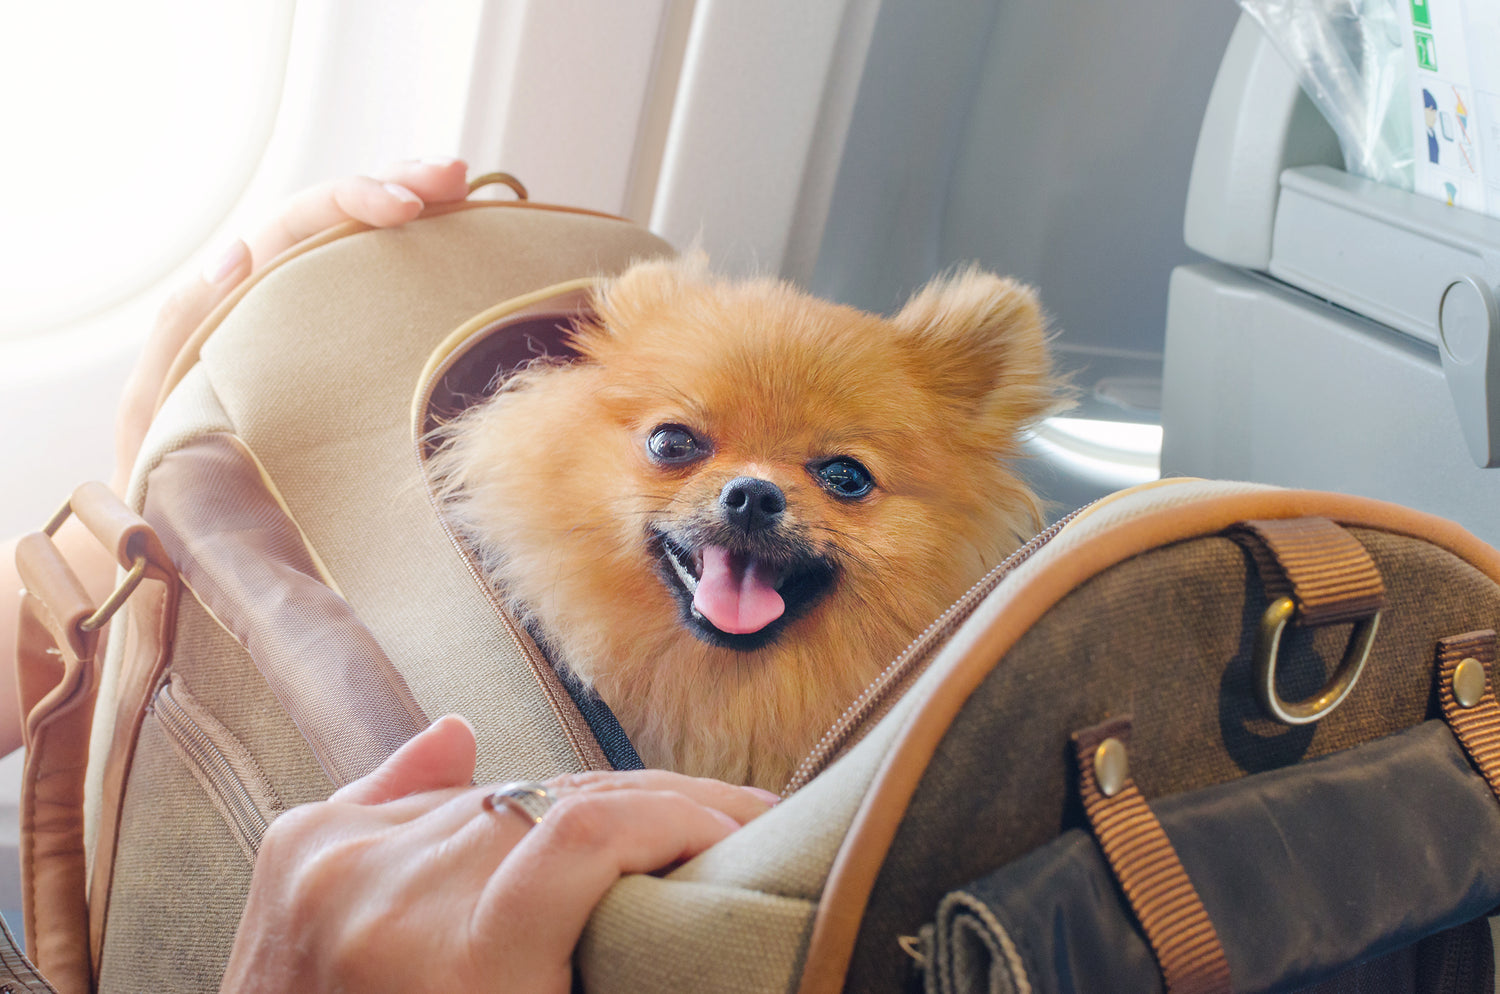 An excited pup sits in a travel bag in its owners' lap on an airplane ride, representing the Black Creek CBD Calming Pet Tincture